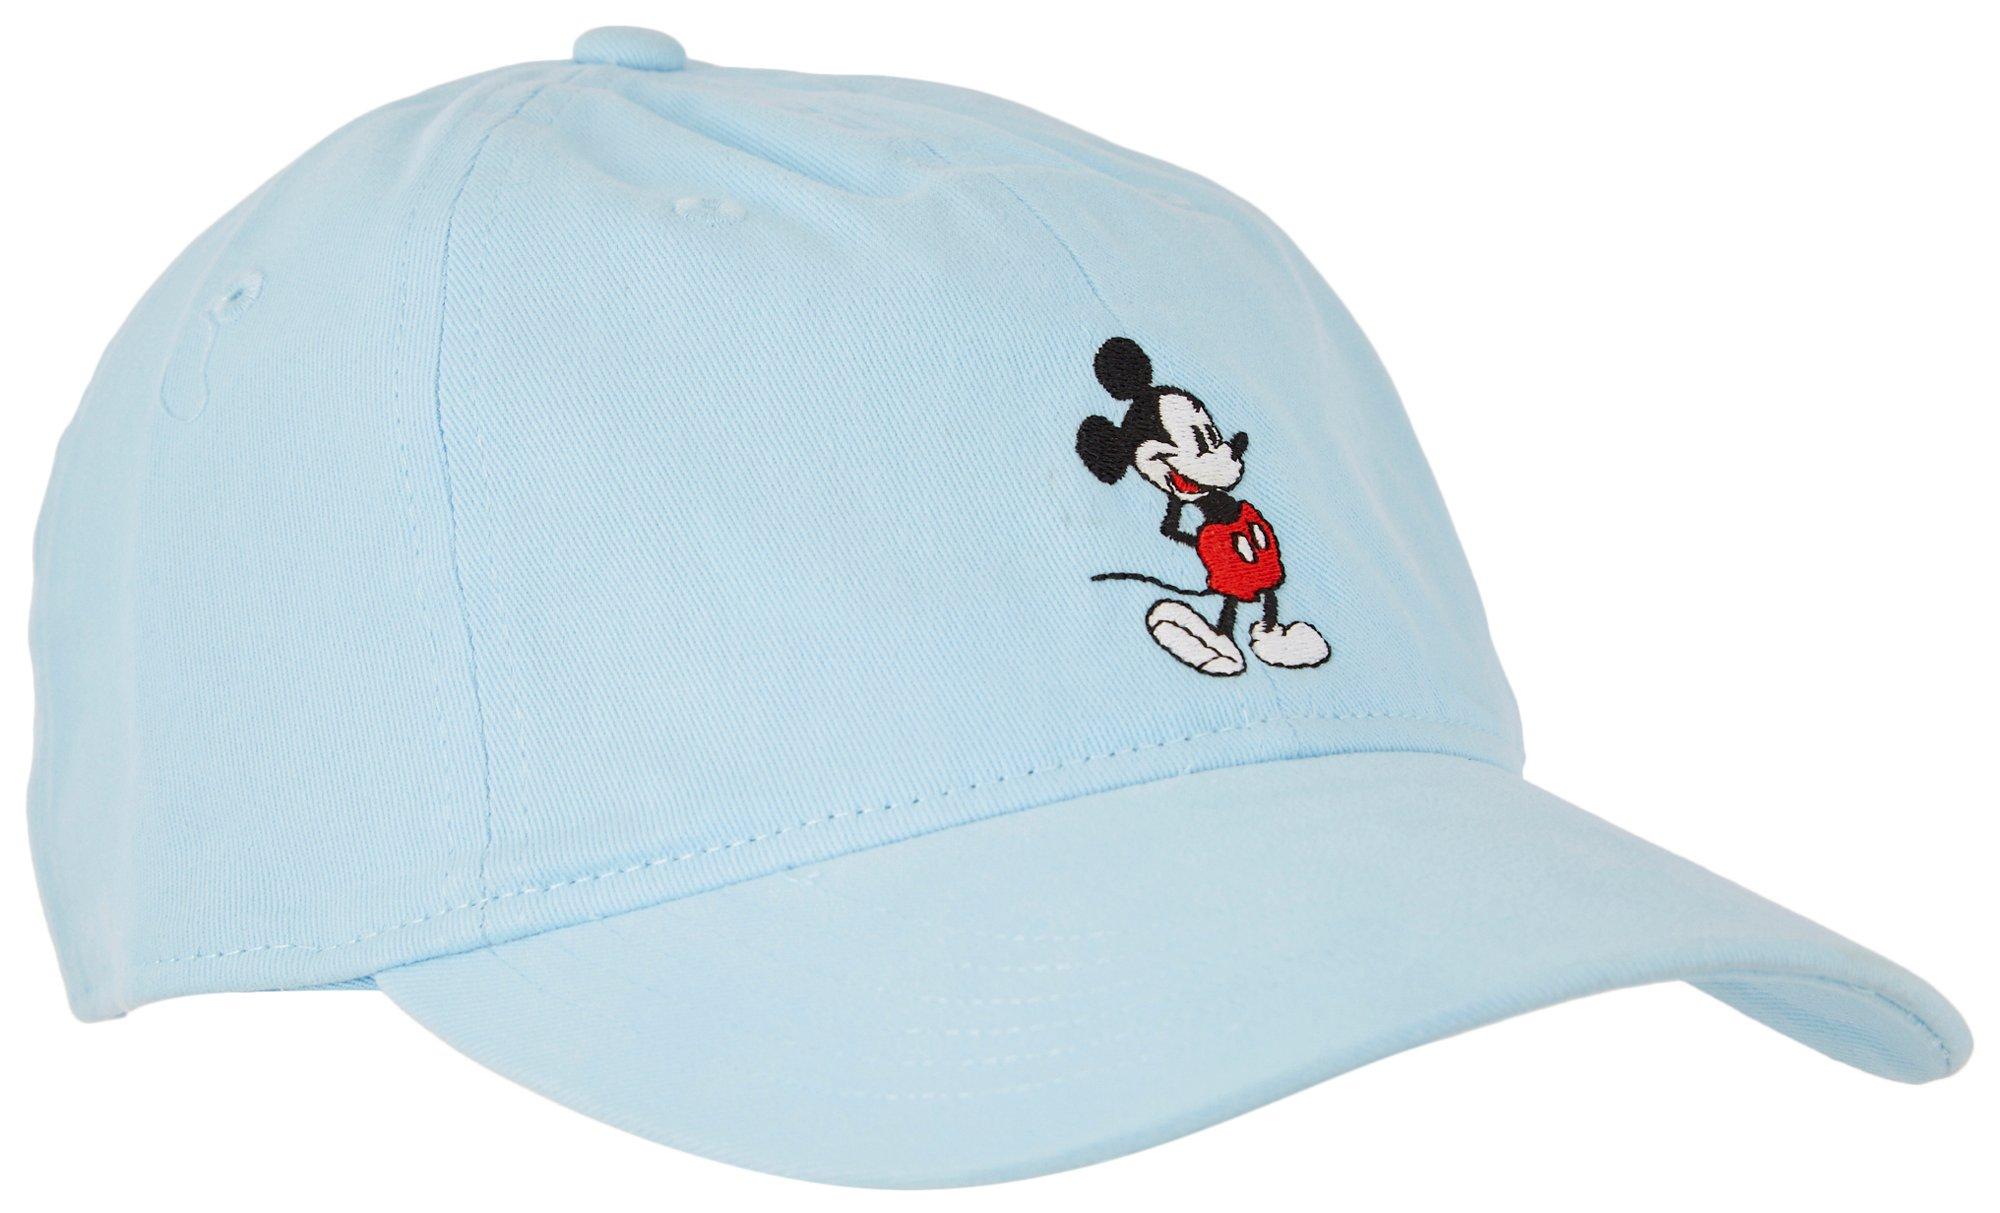 Disney Mickey Mouse Embroidered Adjustable Baseball Hat